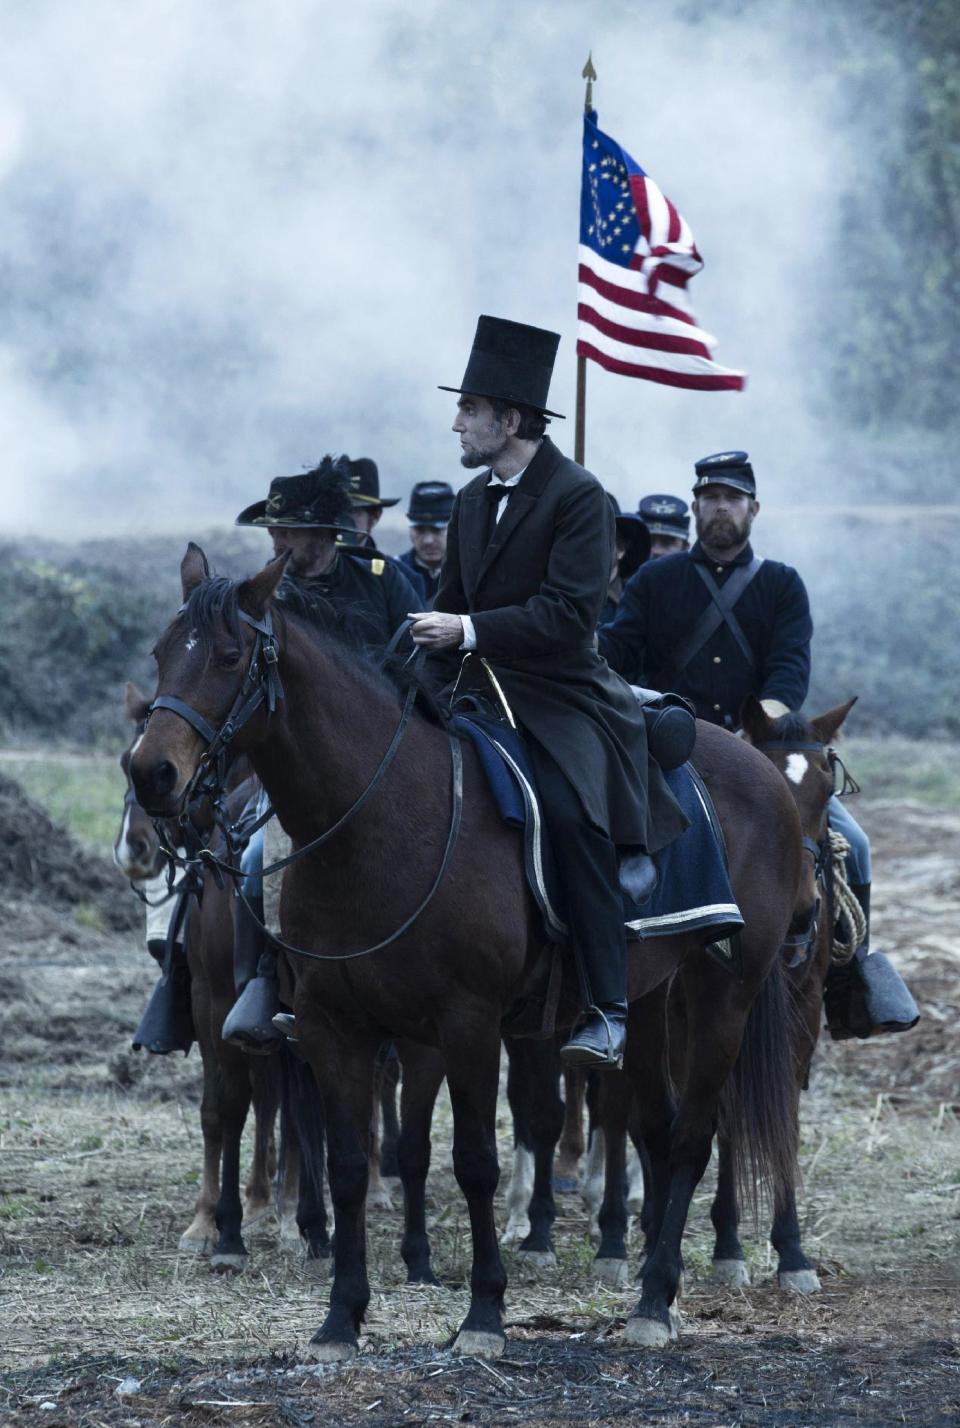 This undated publicity photo provided by DreamWorks and Twentieth Century Fox shows Daniel Day-Lewis as President Abraham Lincoln looking across a battlefield in the aftermath of a terrible siege in this scene from director Steven Spielberg's drama "Lincoln" from DreamWorks Pictures and Twentieth Century Fox. “Lincoln” star Daniel Day-Lewis is expected to earn his third Oscar in the title role, making him only the sixth performer to win three or more Oscars and the first to win three times in the best-actor category. (AP Photo/DreamWorks, Twentieth Century Fox, David James, File)